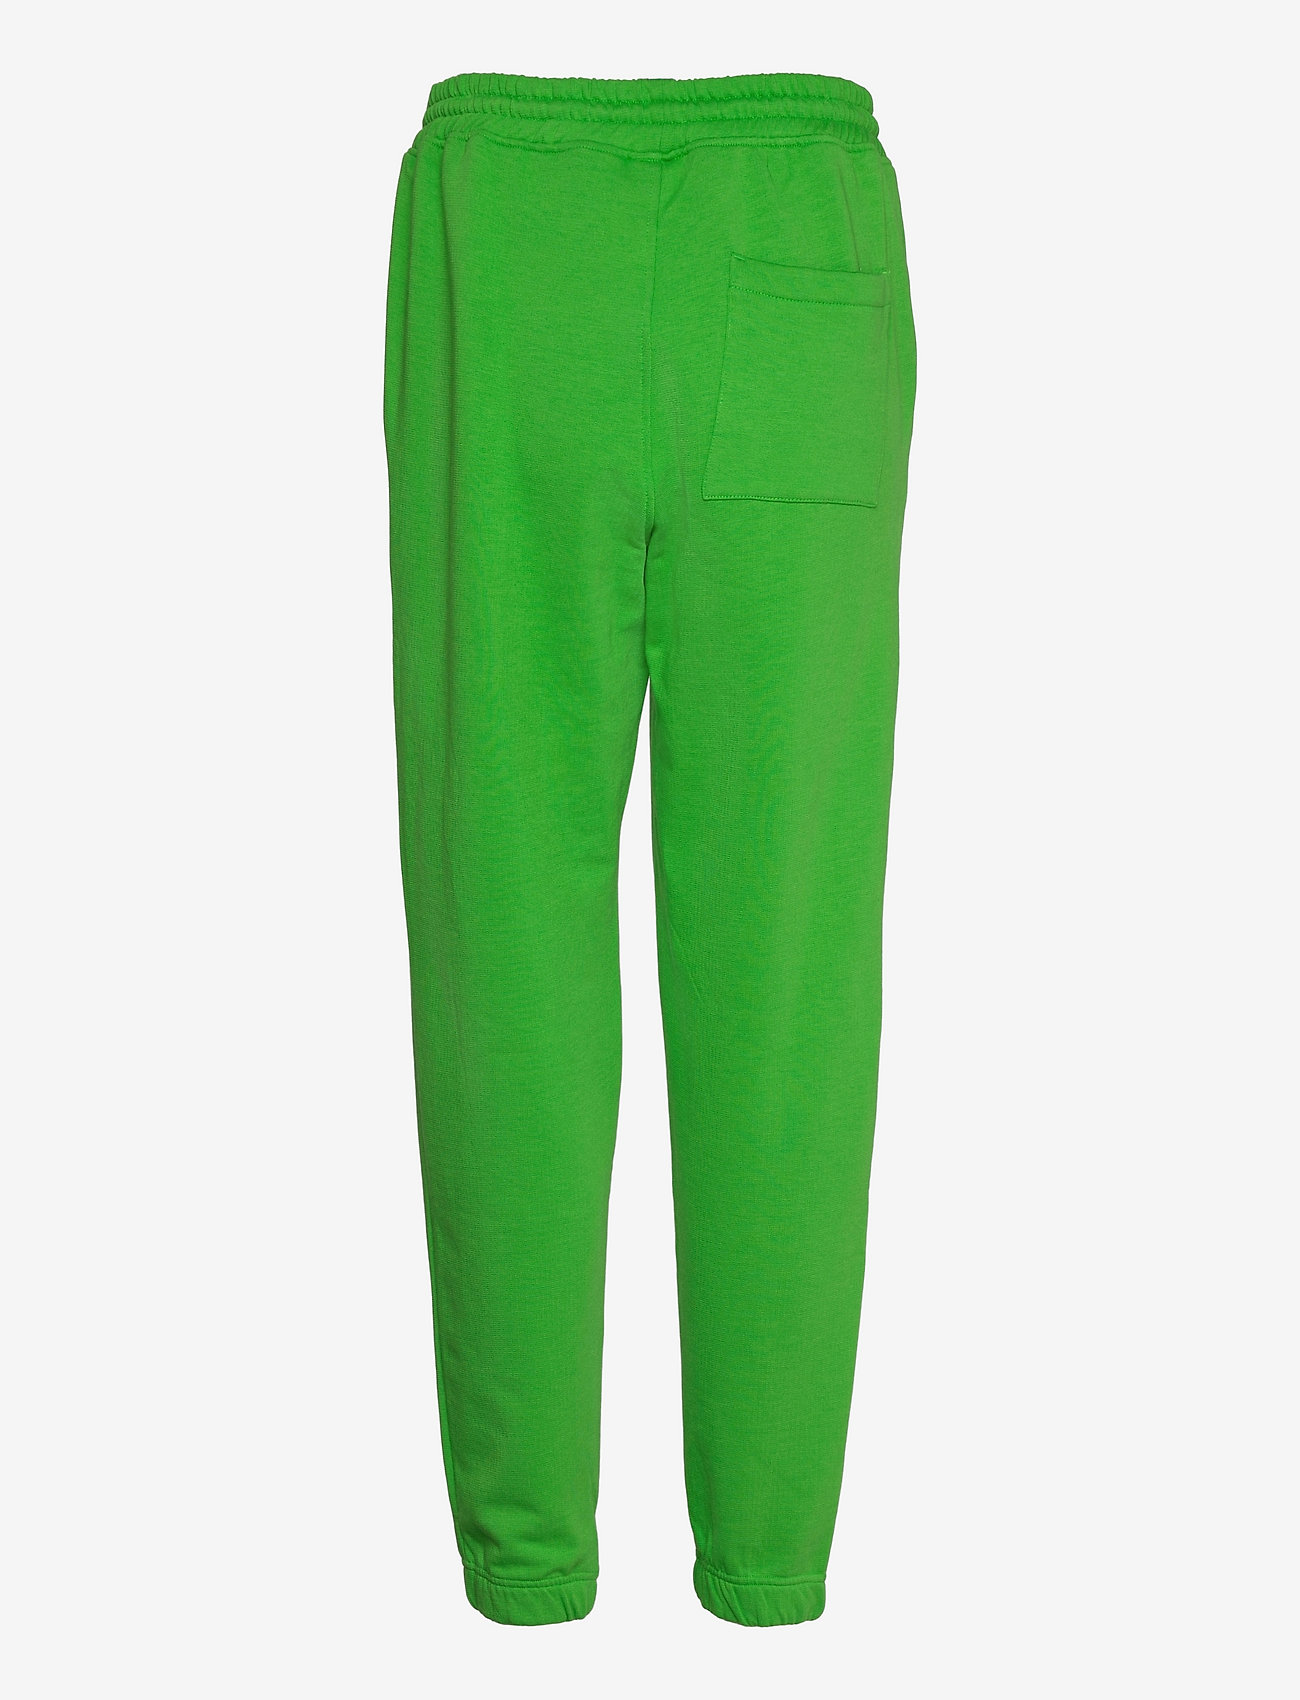 Hanger by Holzweiler - Hanger Trousers - plus size & curvy - green 6340 - 1